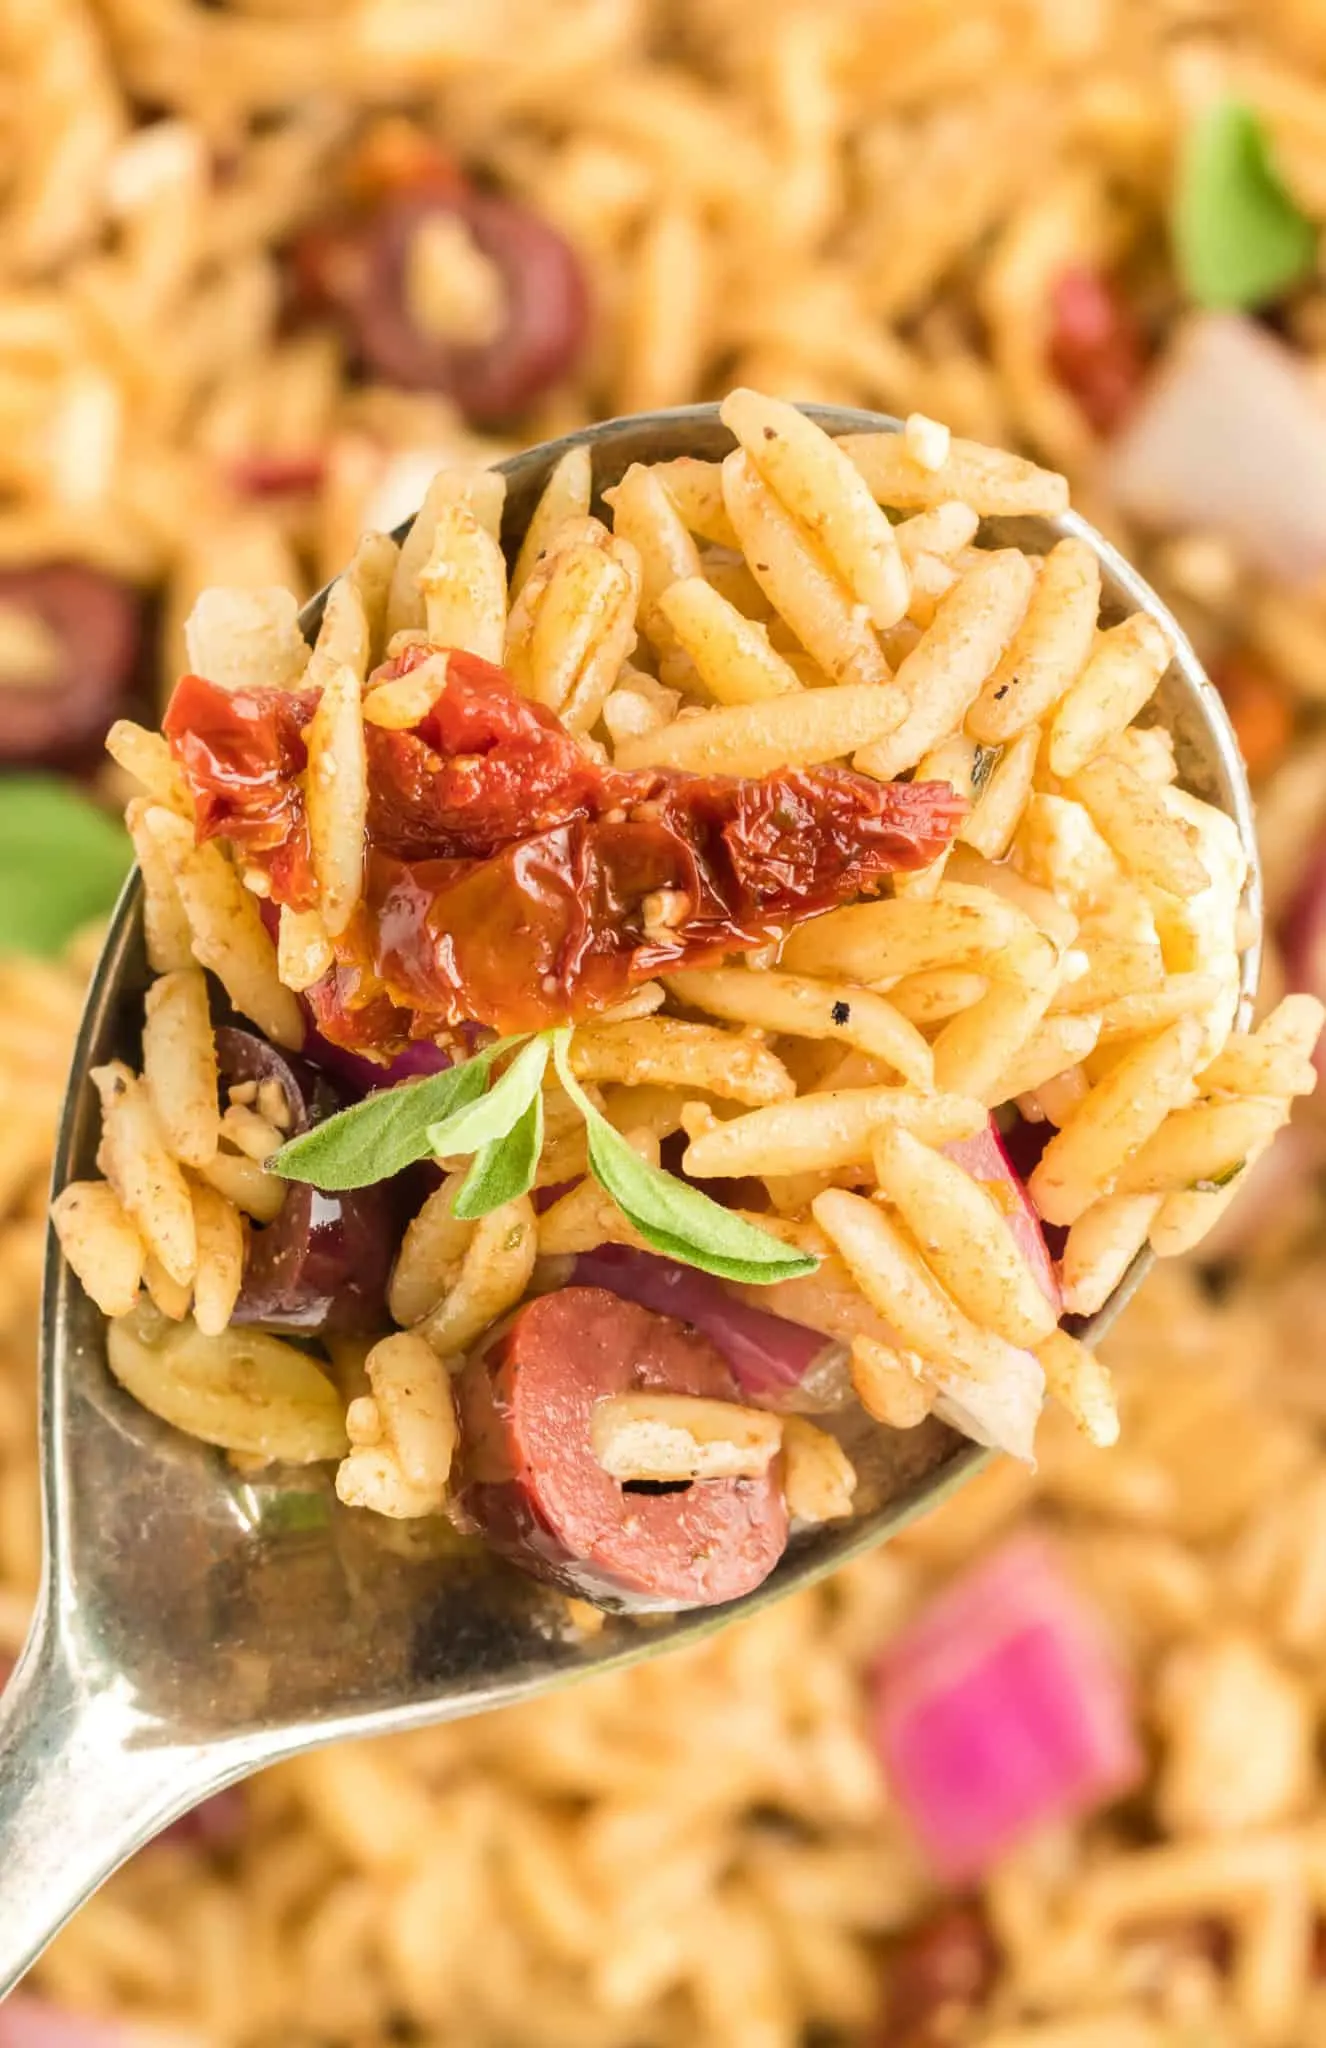 Mediterranean Orzo Pasta Salad is a delicious pasta loaded with sun dried tomatoes, red onions, Kalamata olives and feta cheese all tossed in a honey Dijon balsamic dressing.